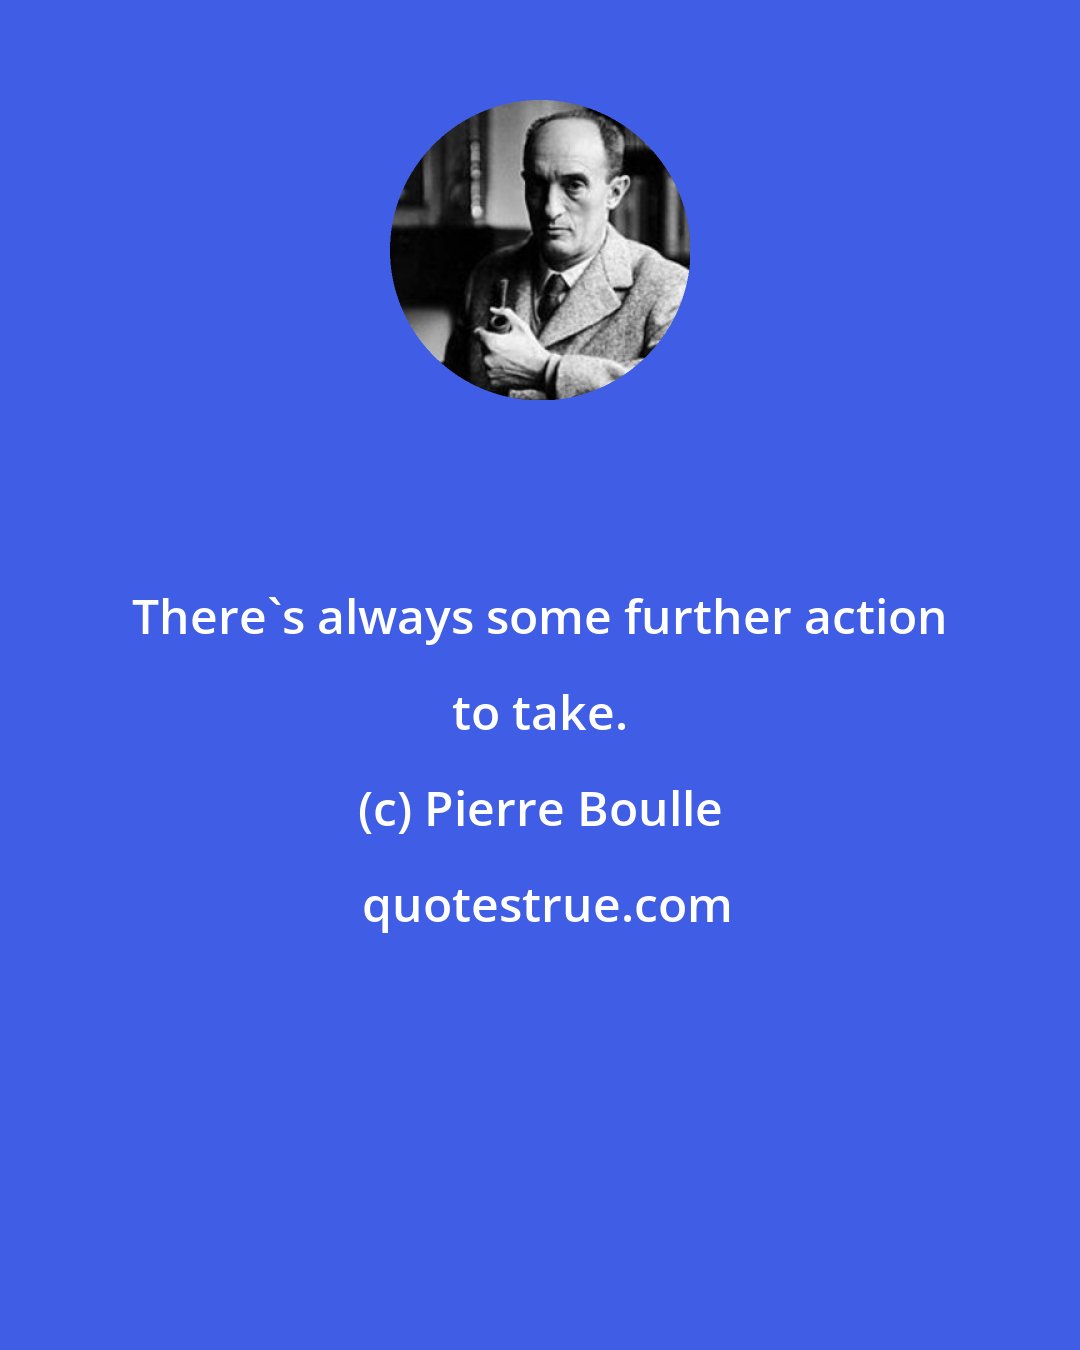 Pierre Boulle: There's always some further action to take.